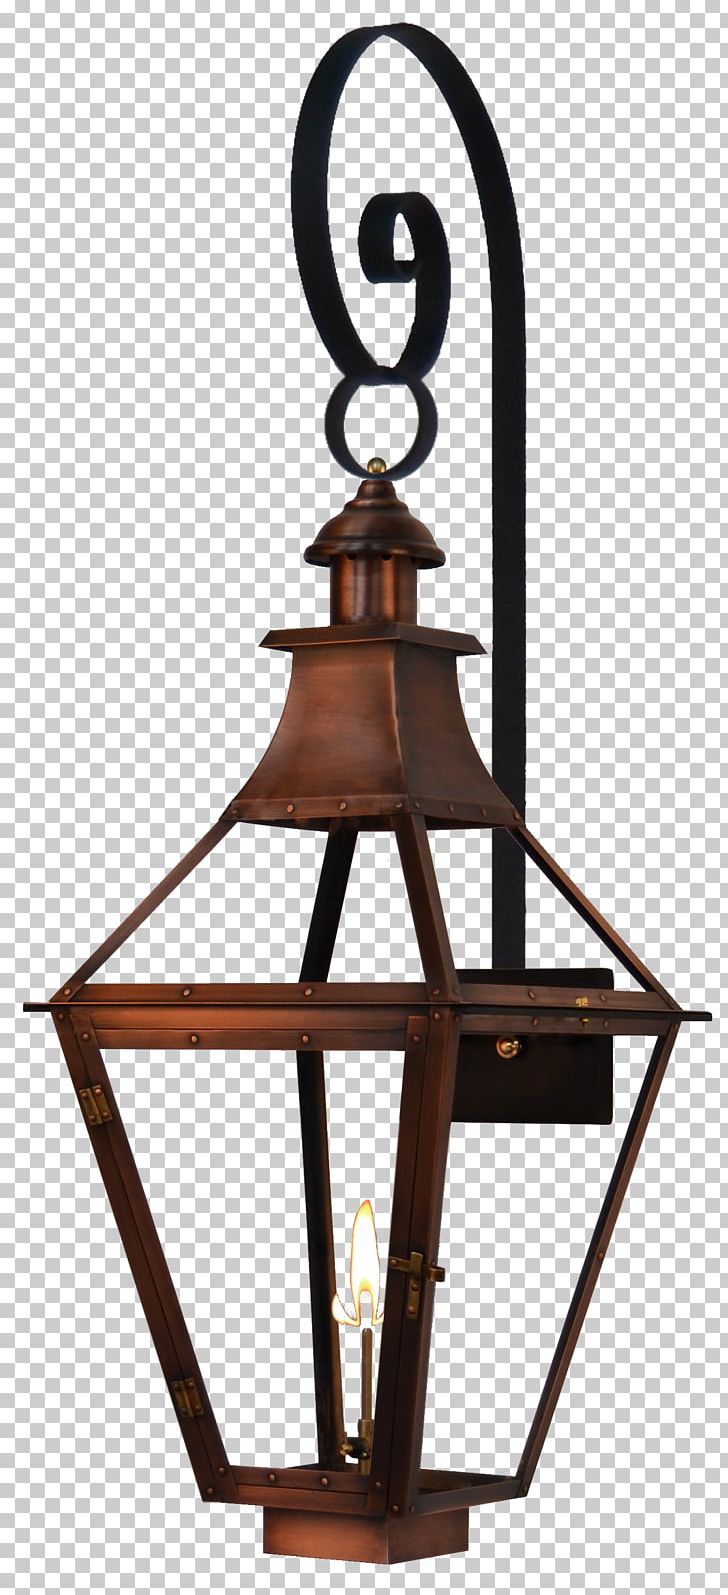 Gas Lighting Lantern Coppersmith Street Light PNG, Clipart, Candle, Candle Holder, Ceiling, Ceiling Fixture, Coppersmith Free PNG Download